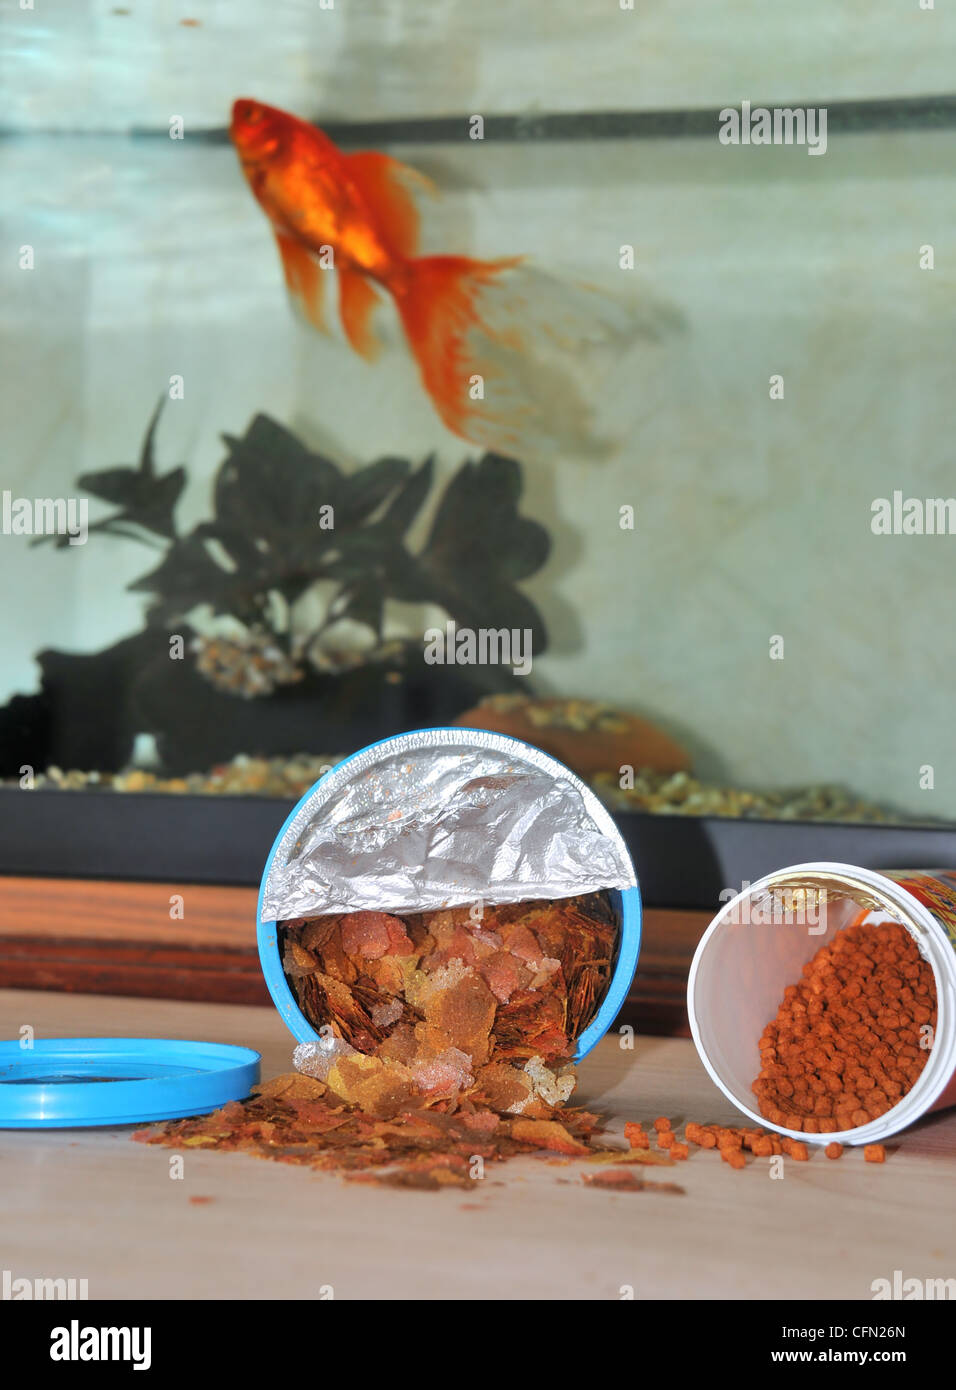 Gold fish food of  flakes and sticks in the foreground, with a goldfish in an aquarium  feeding on flakes in the background. Stock Photo